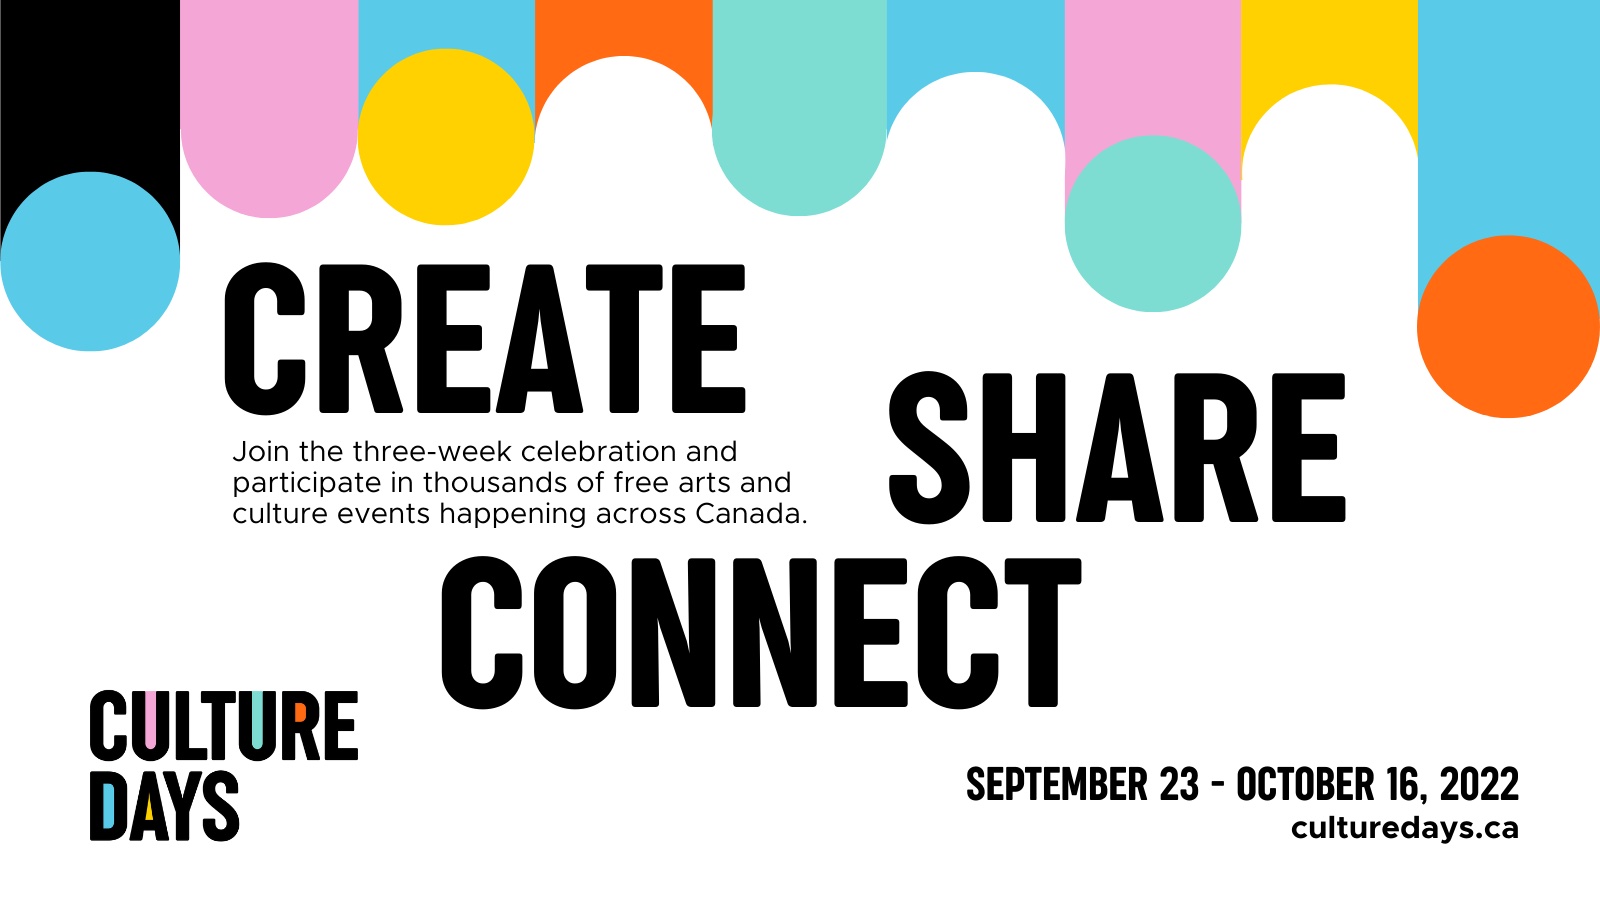 Join the three-week celebration and participate in thousands of free arts and culture events happening across Canada.